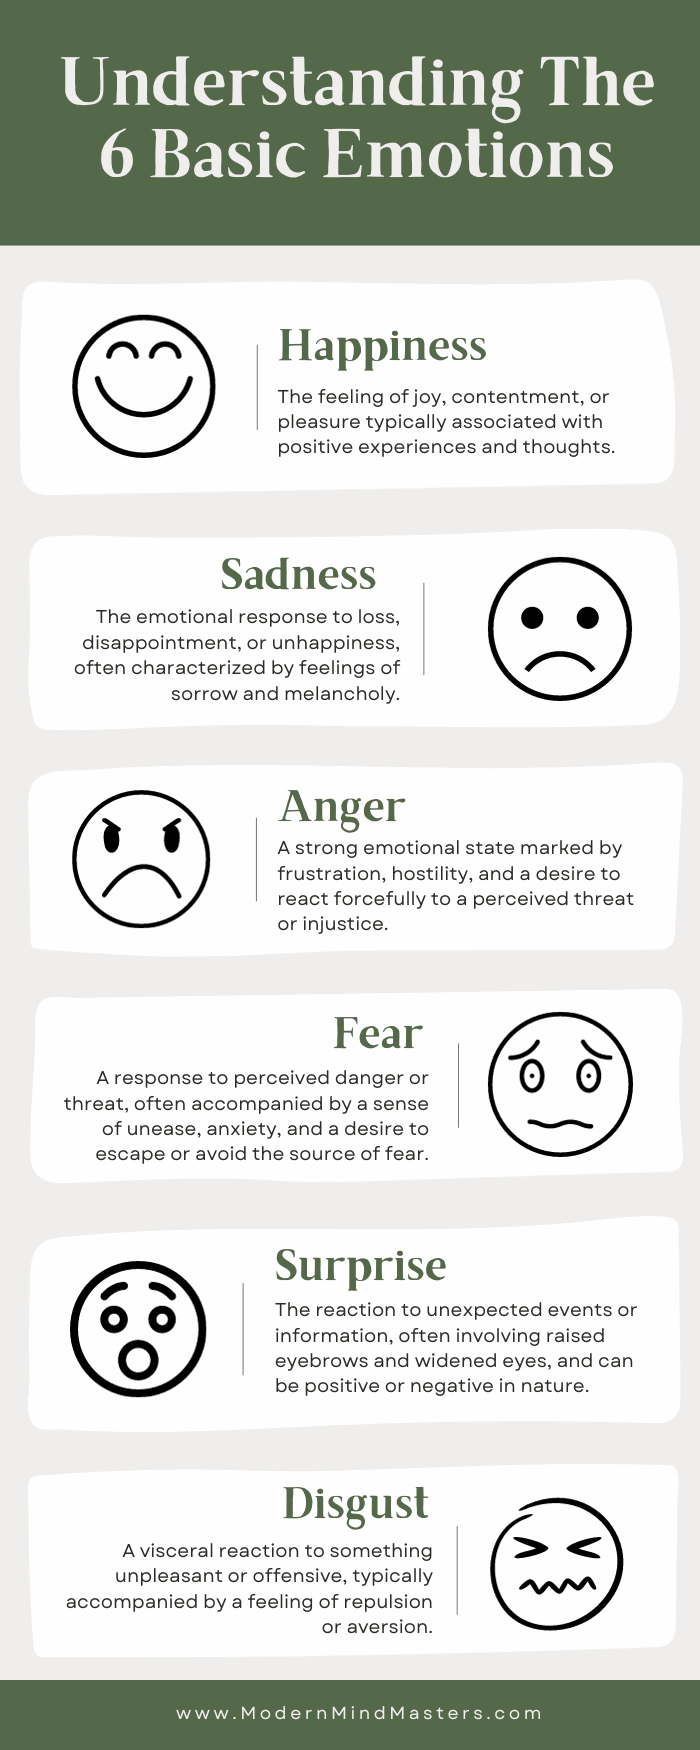 Six basic emotions include happiness, sadness, anger, fear, surprise, and disgust.